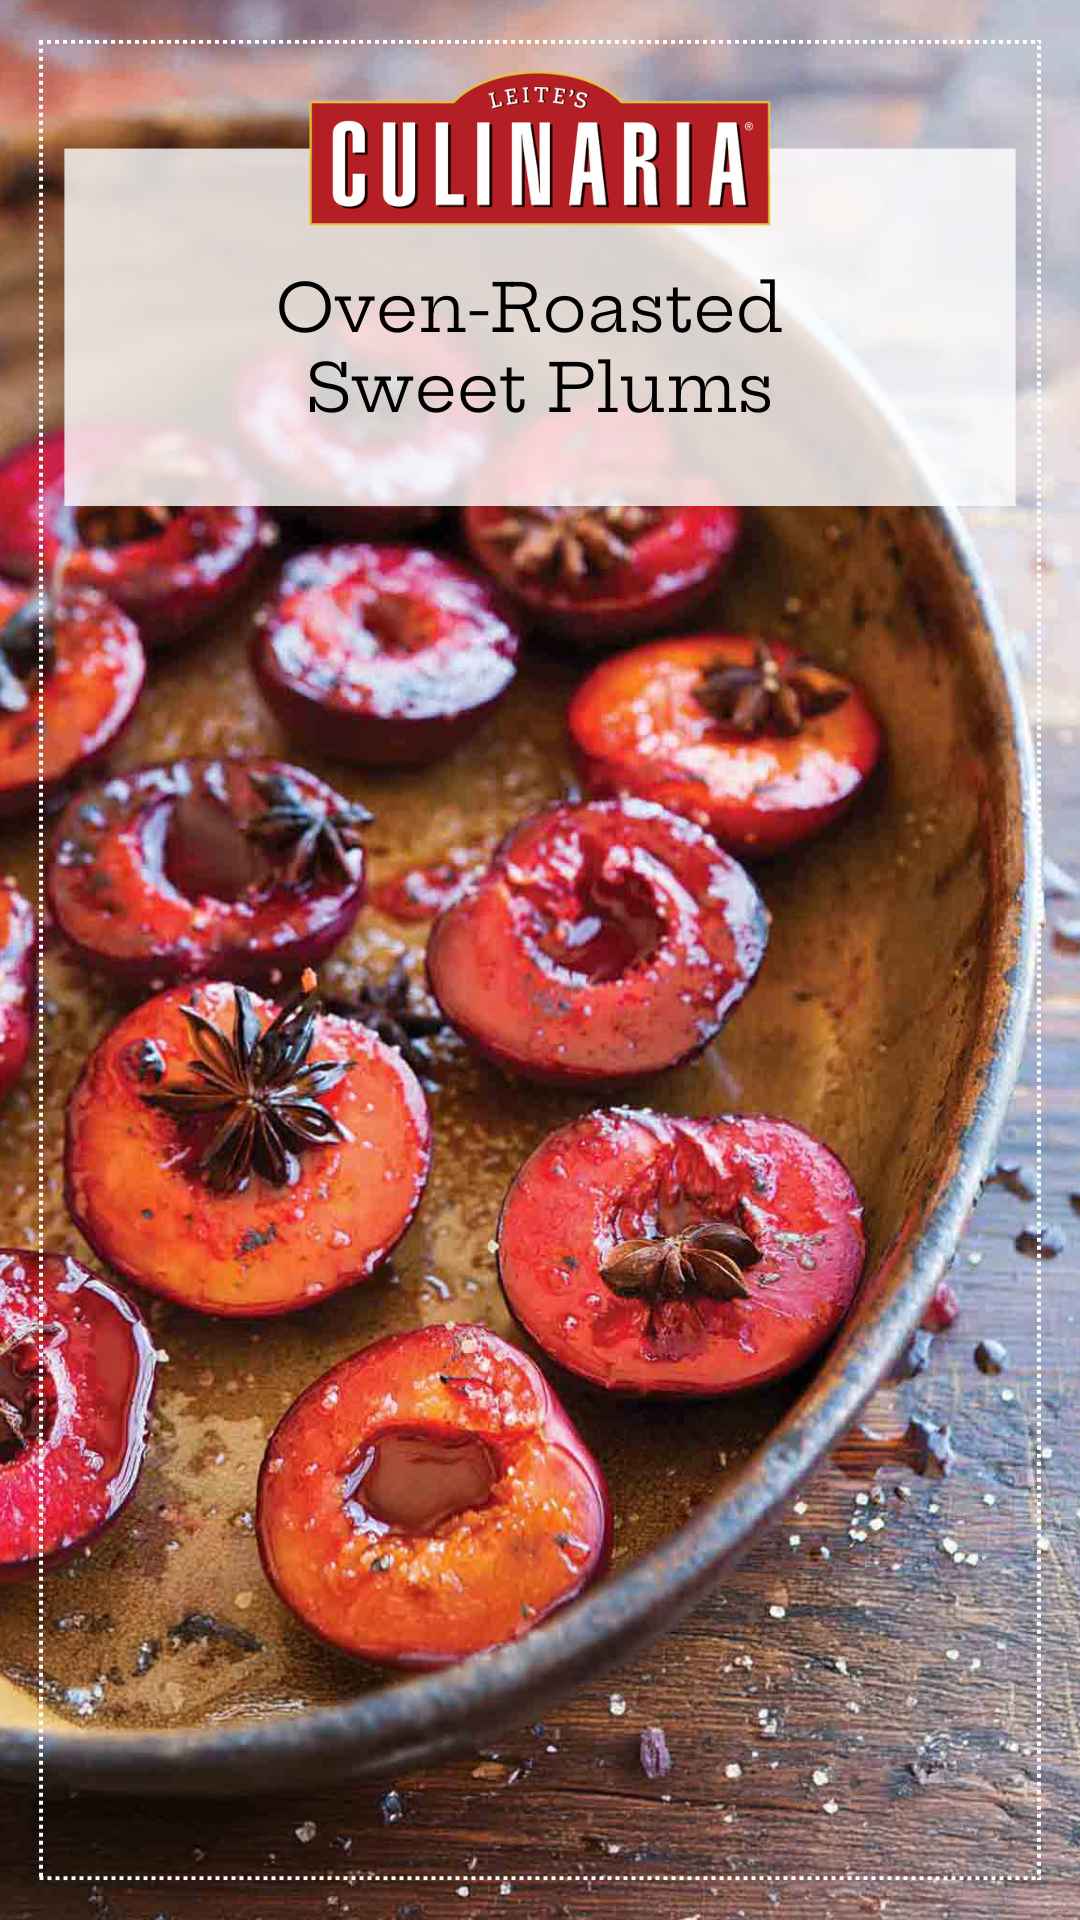 A metal baking dish filled with roasted plum halves that are topped with star anise.